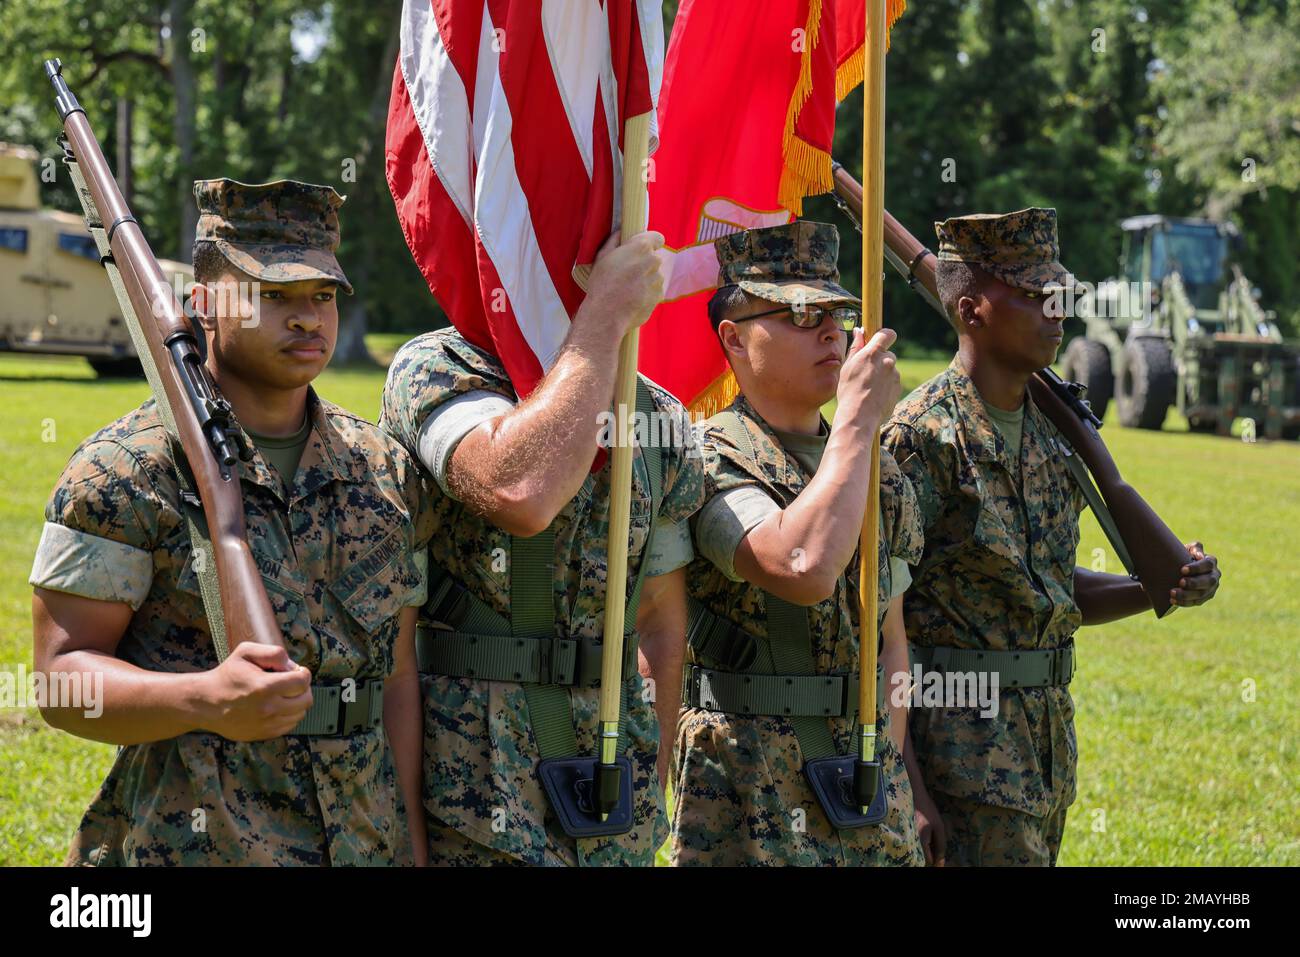 U.S. Marines with the II Marine Expeditionary Force Support Battalion present the colors during the II MSB change of command ceremony on Camp Lejeune, North Carolina, June 8, 2022. During the change of command ceremony, Lt. Col. Robert Fairley relinquished command of II MSB to Lt. Col. Brian Carthon. Stock Photo